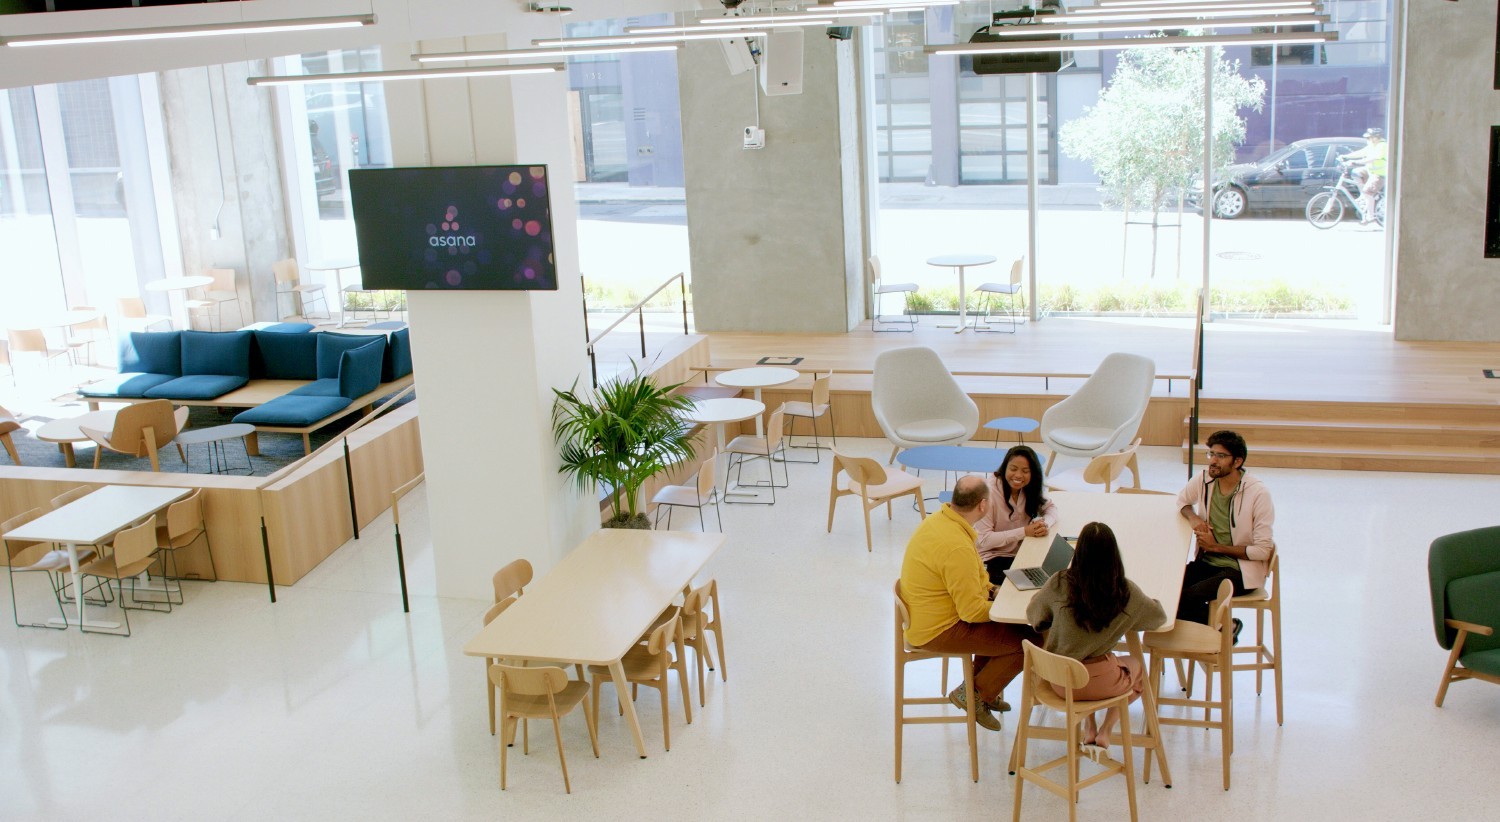 Asana's primary communal space in San Francisco is a great place for large groups to gather